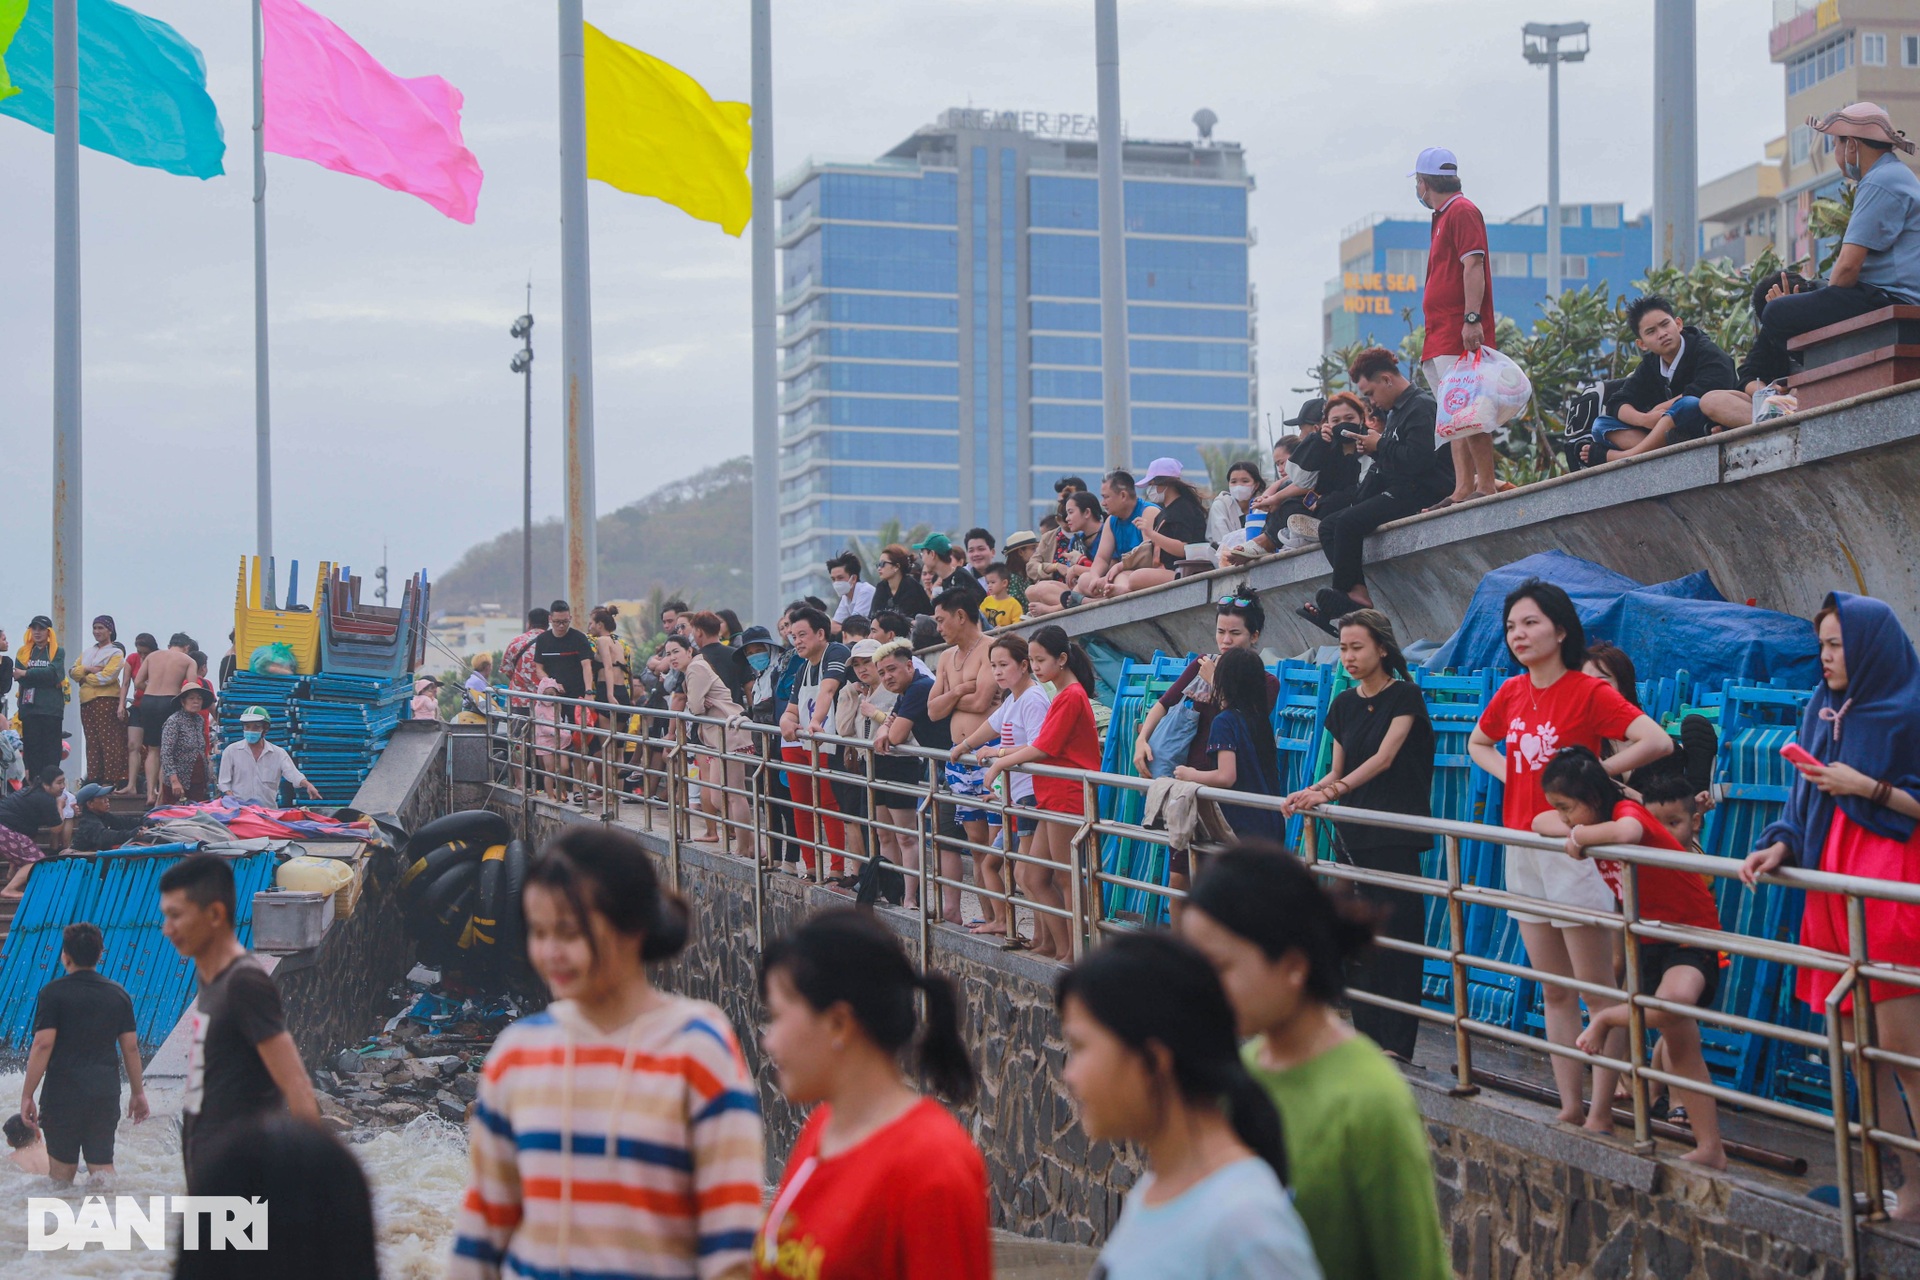 People flock to the beach in the Tau region on the 4th of Tet - 11